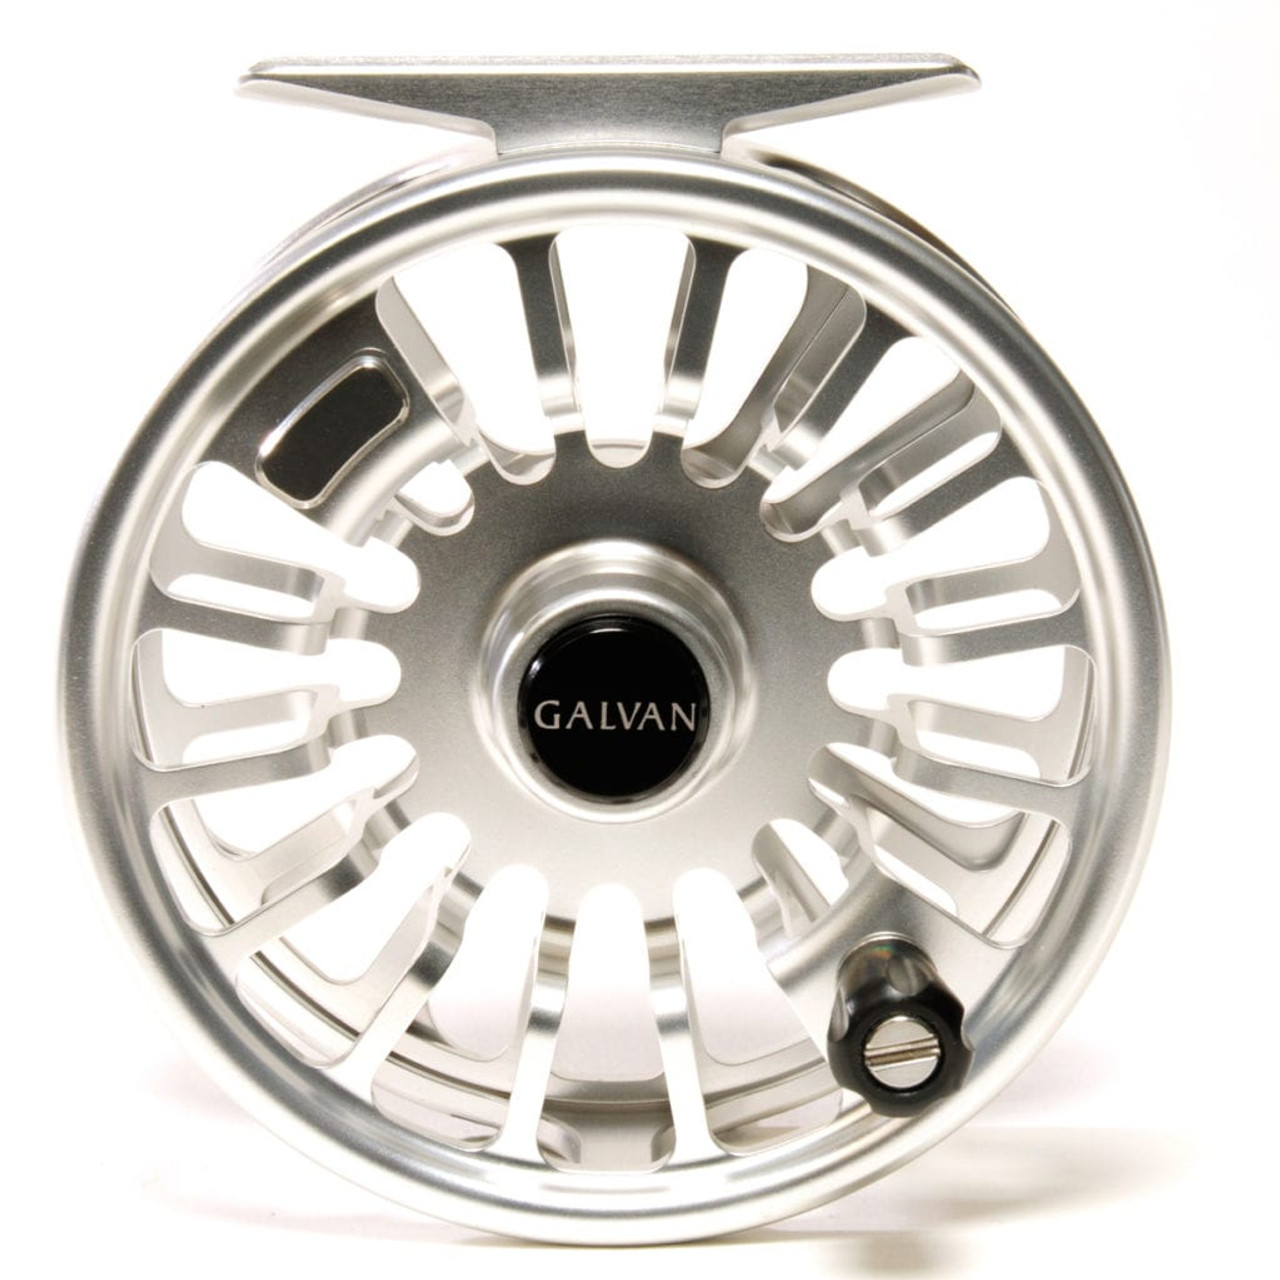 Galvan Torque Series Fly Reel - Ascent Fly Fishing